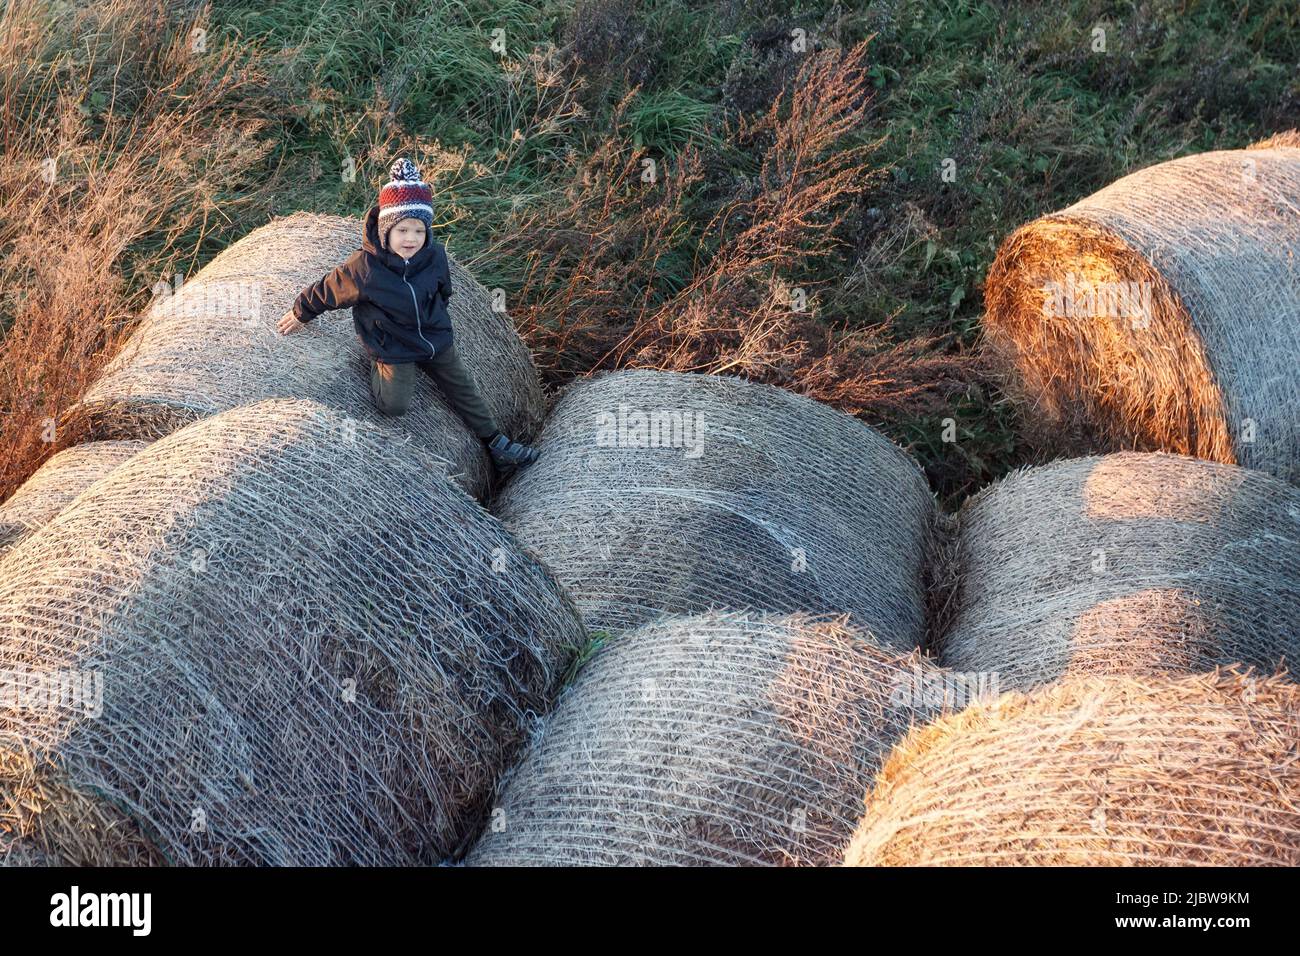 A little cute boy with a warm autumn hat among large rolls of straw in the evening sunlight, photo taken from above. Stock Photo